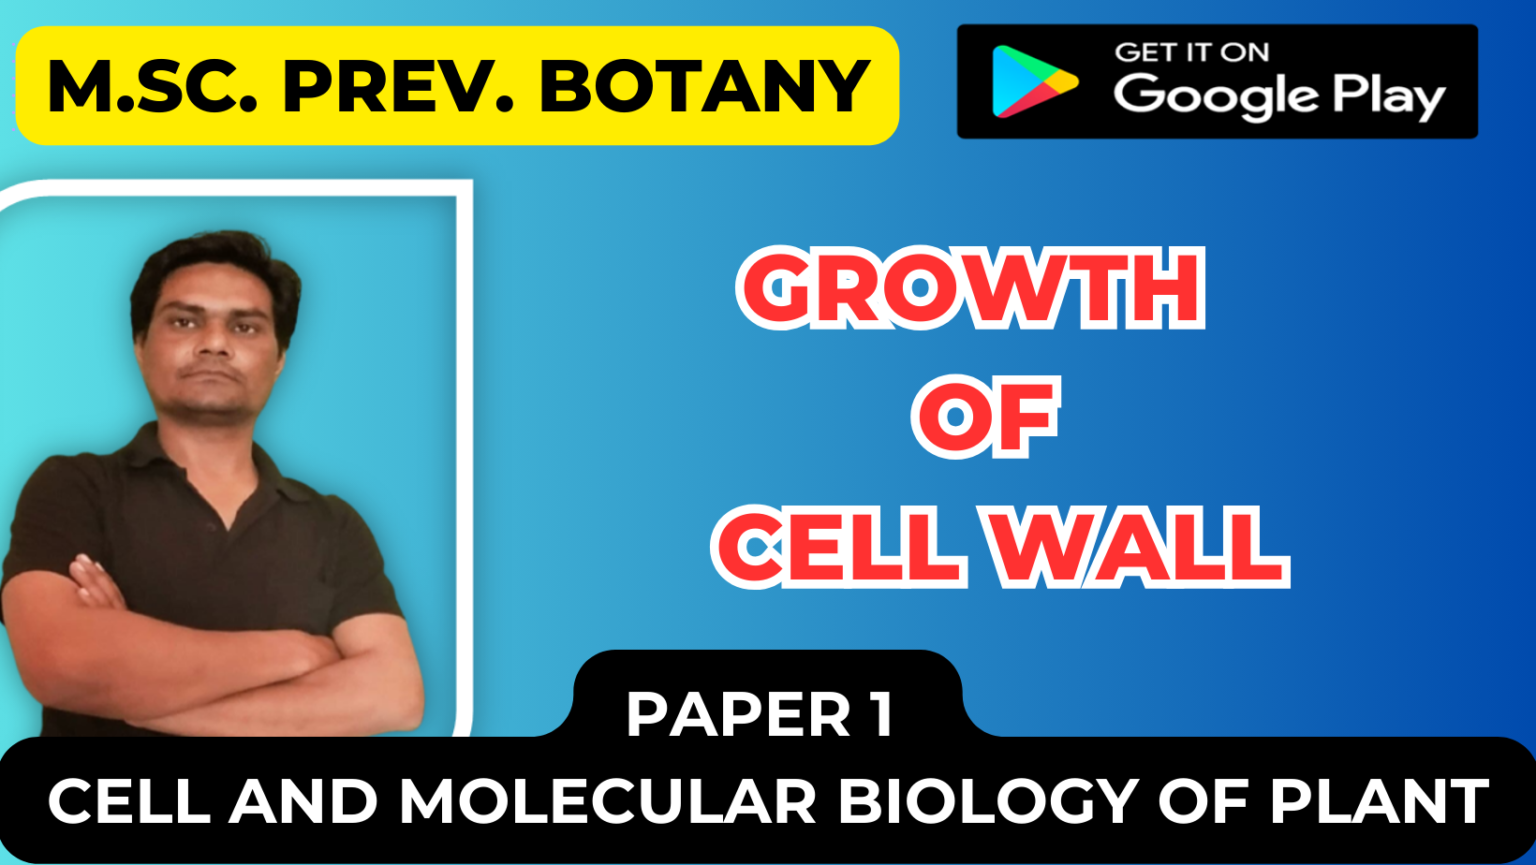 Growth of cell wall